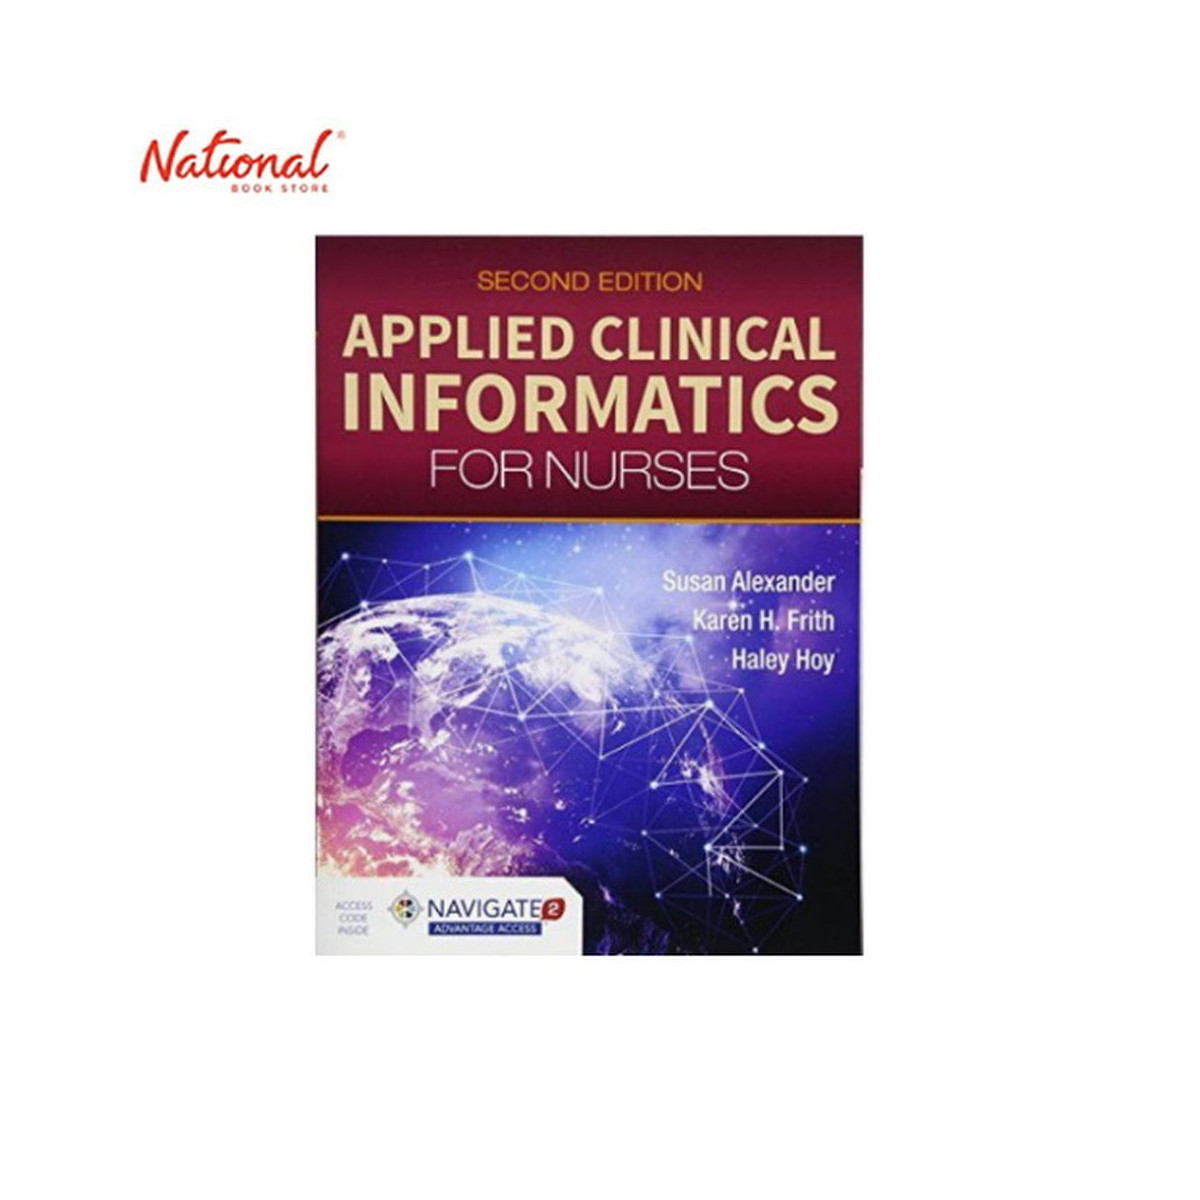 Applied Clinical Informatics for Nurses Second Edition Trade Paperback by Susan Alexander